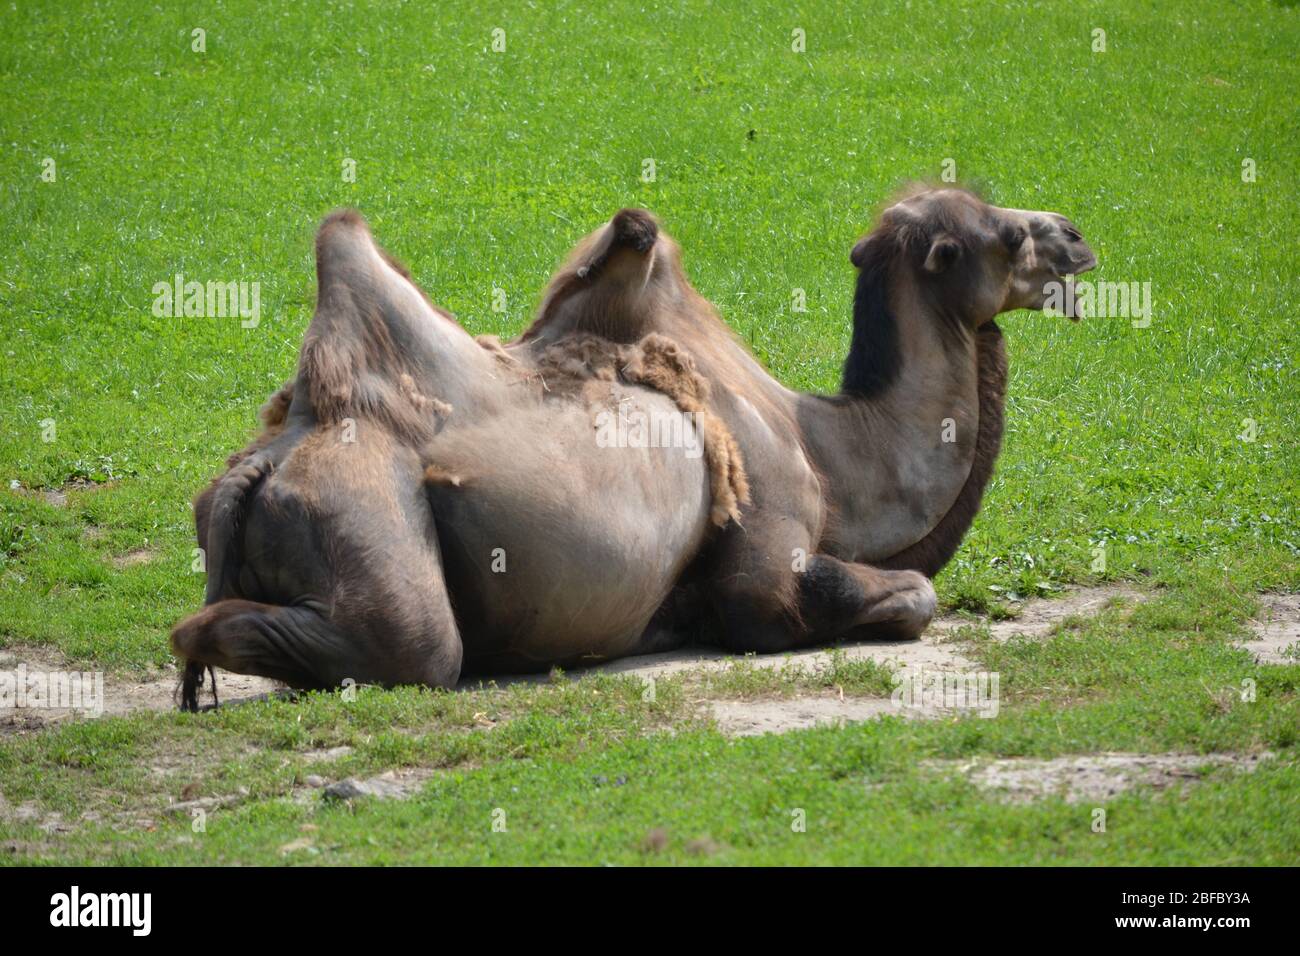 Camel laying on grass Stock Photo - Alamy